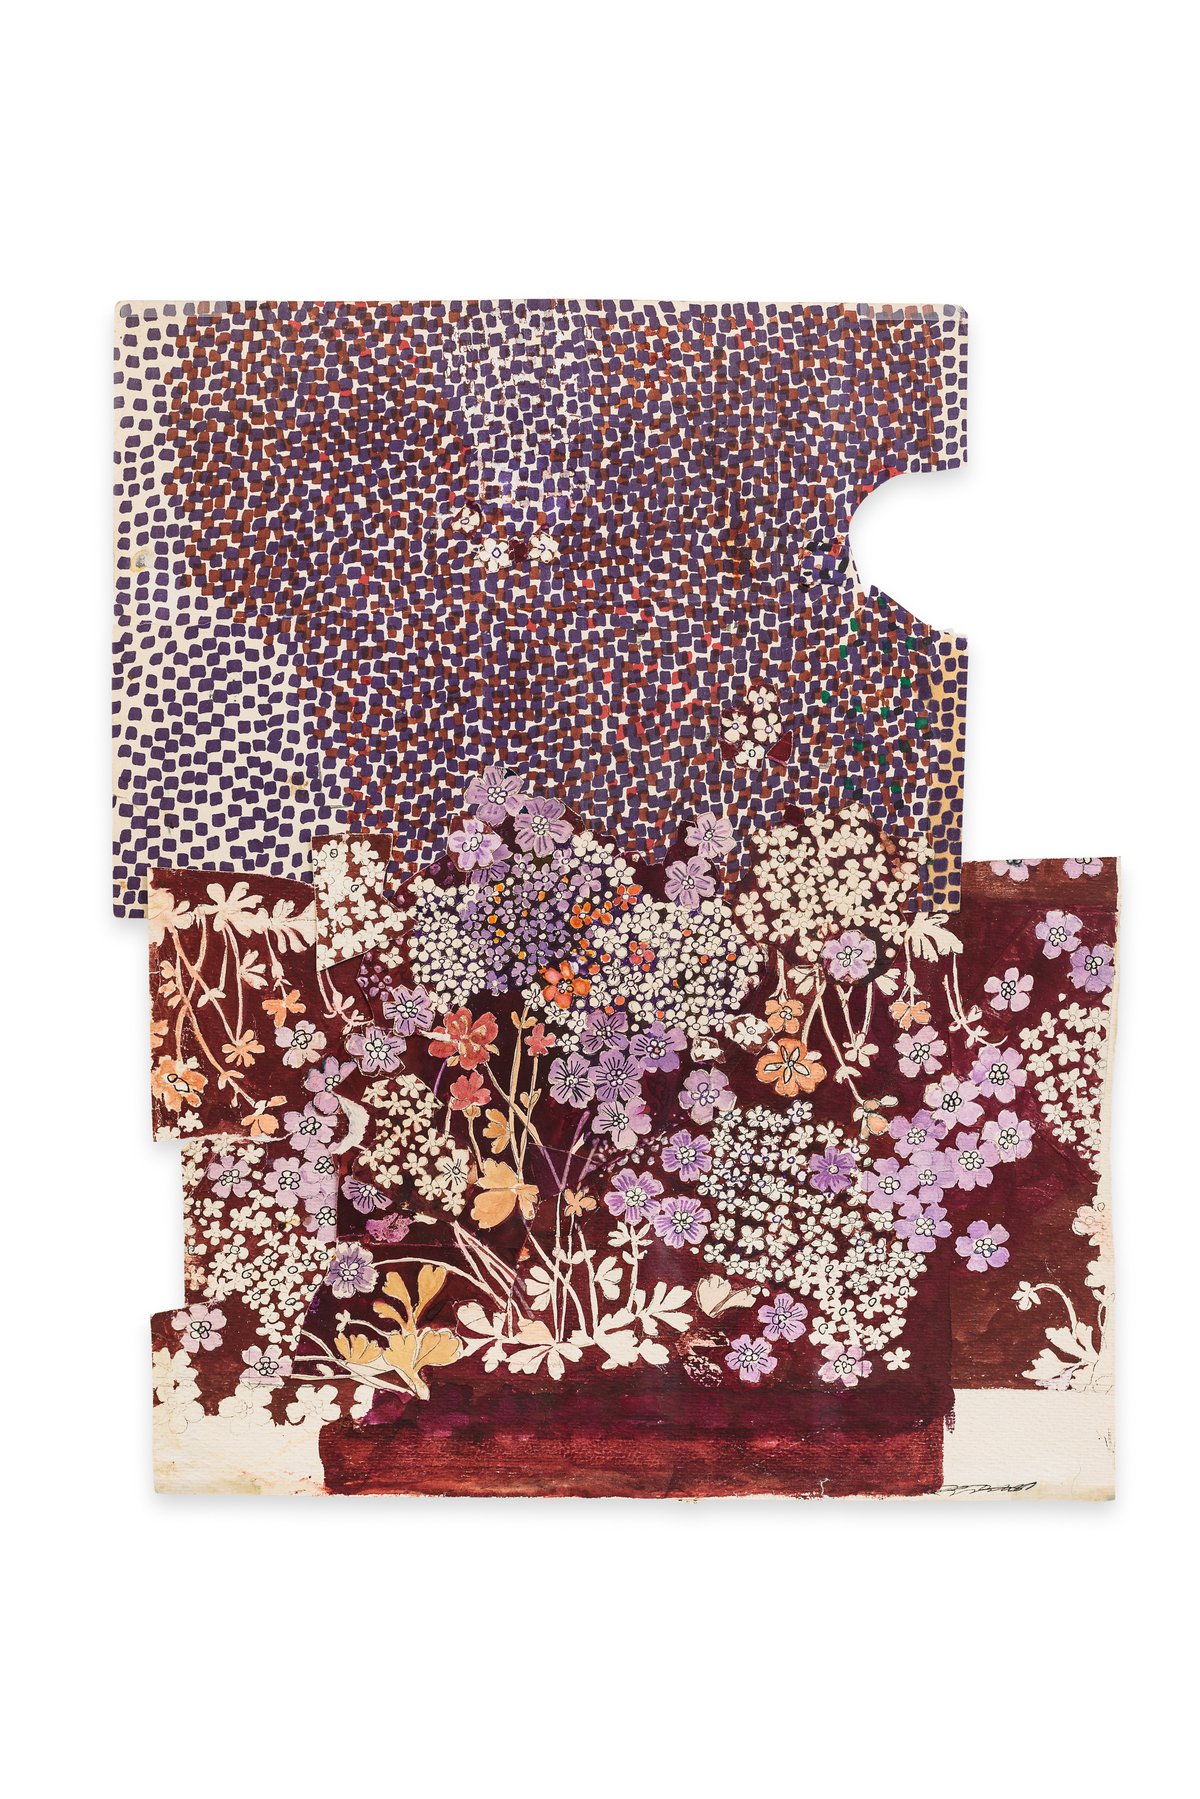 Anna AndreevaWild Flower + Abstraction, 1954-58Collage45 x 36 cm / 51 x 42 cm (framed)